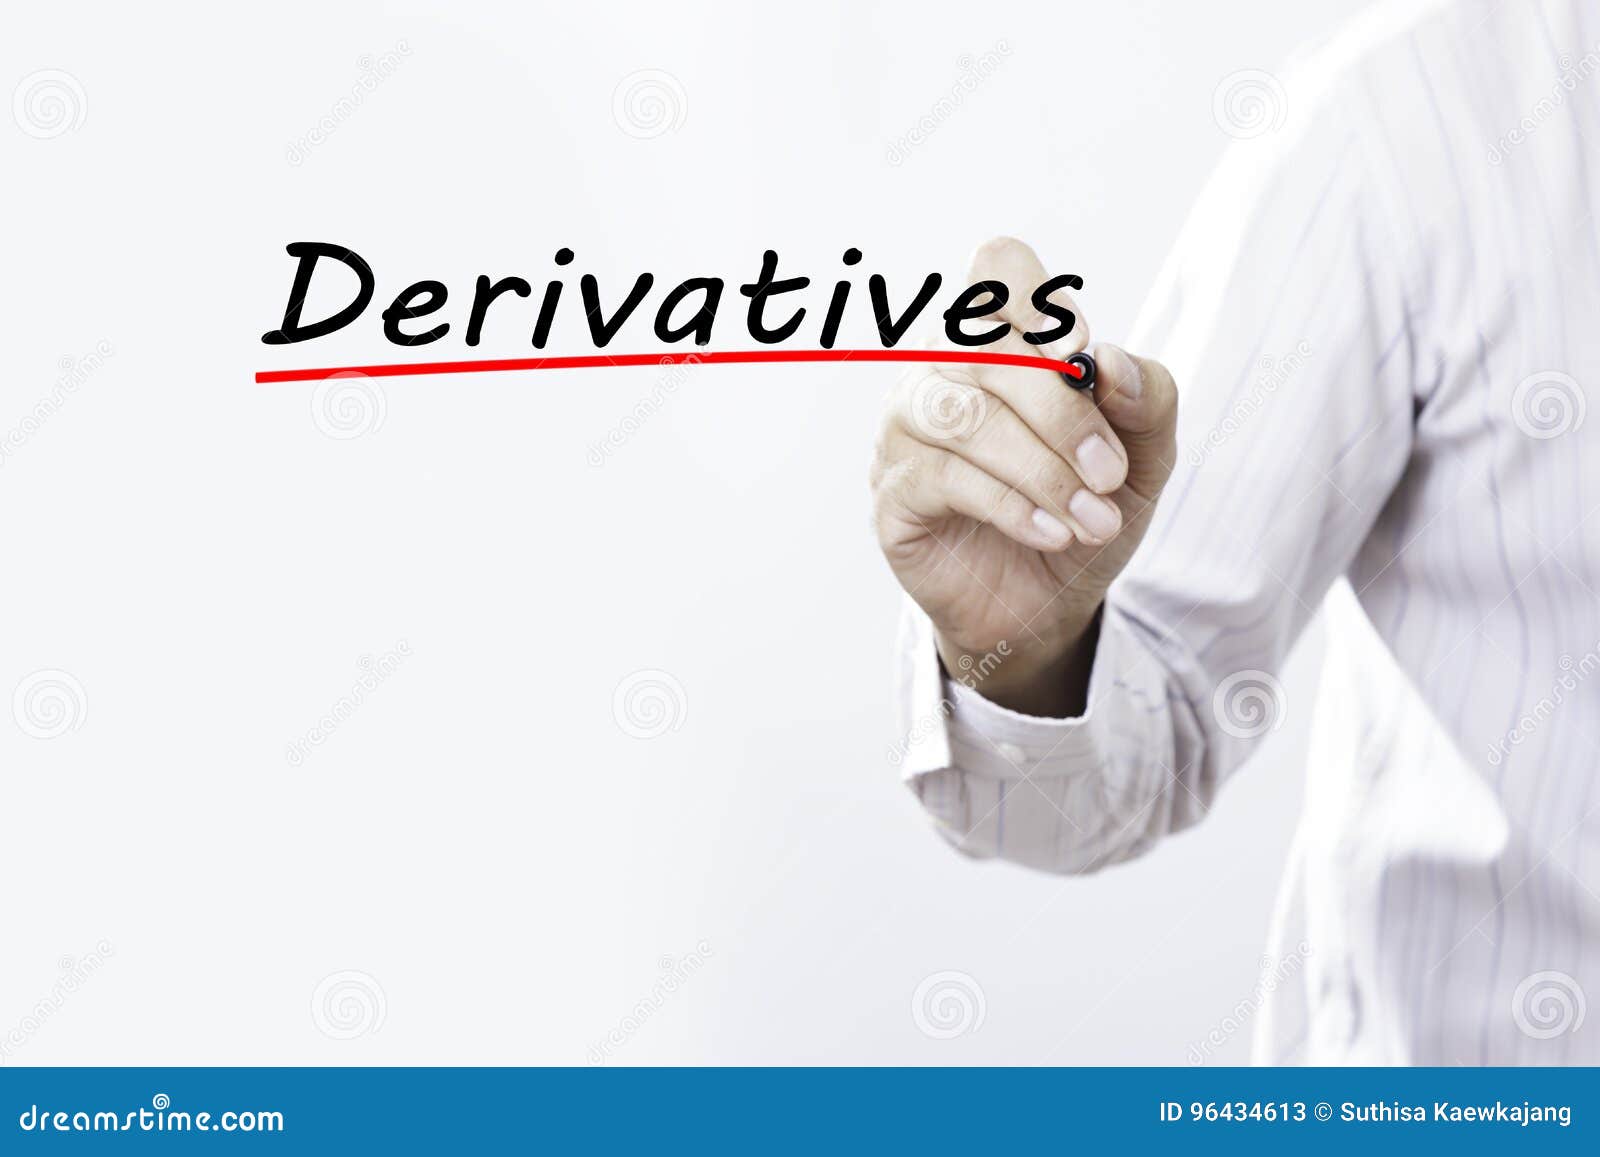 businessman hand writing derivatives with red marker on transparent wipe board, business concept